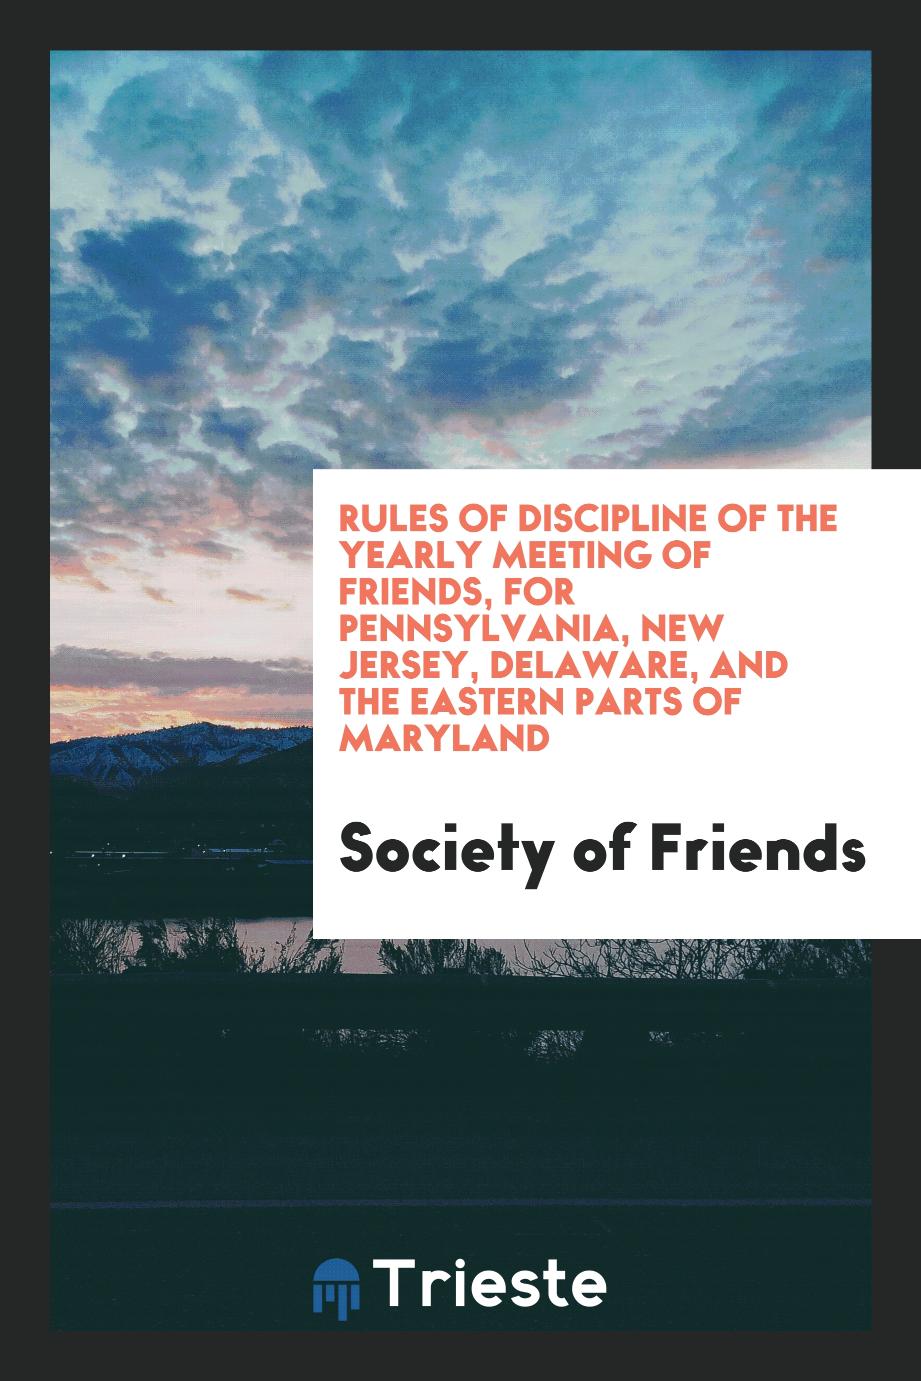 Rules of Discipline of the Yearly Meeting of Friends, for Pennsylvania, New Jersey, Delaware, and the Eastern Parts of Maryland